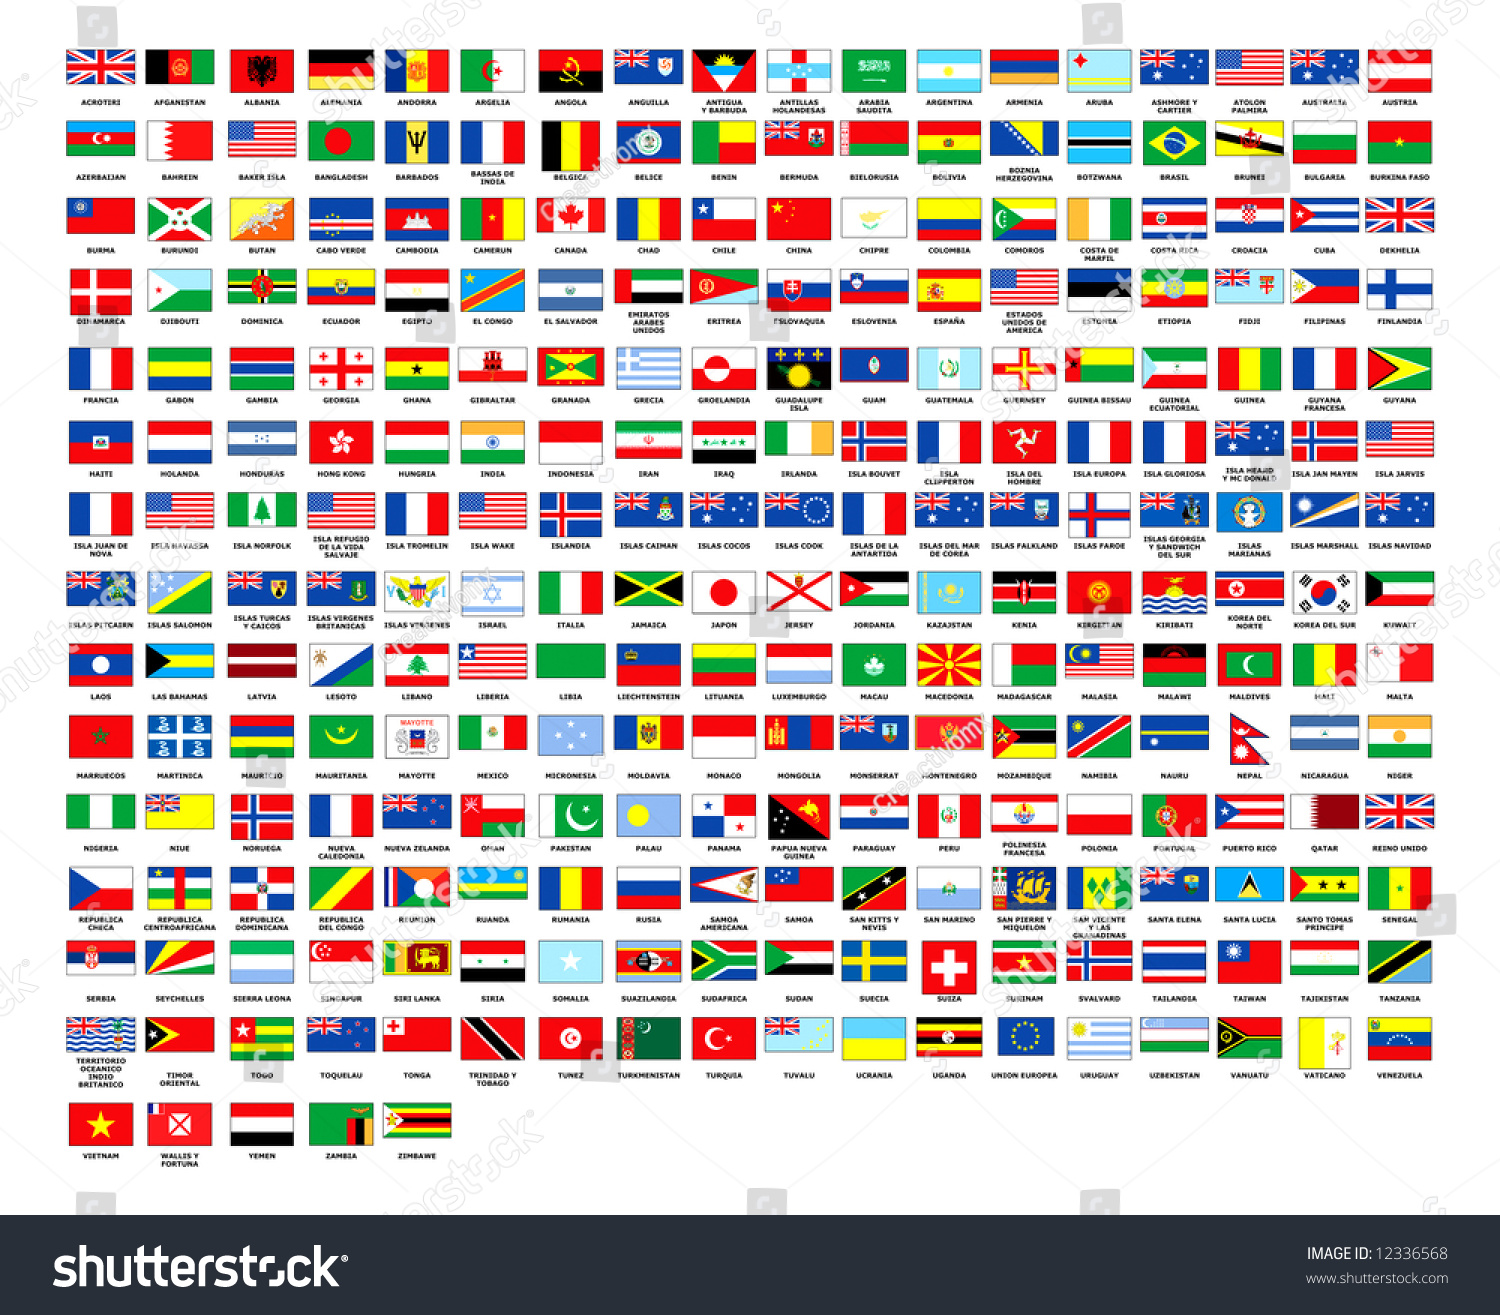 Countries In Alphabetical Order With Flags | Emaps World